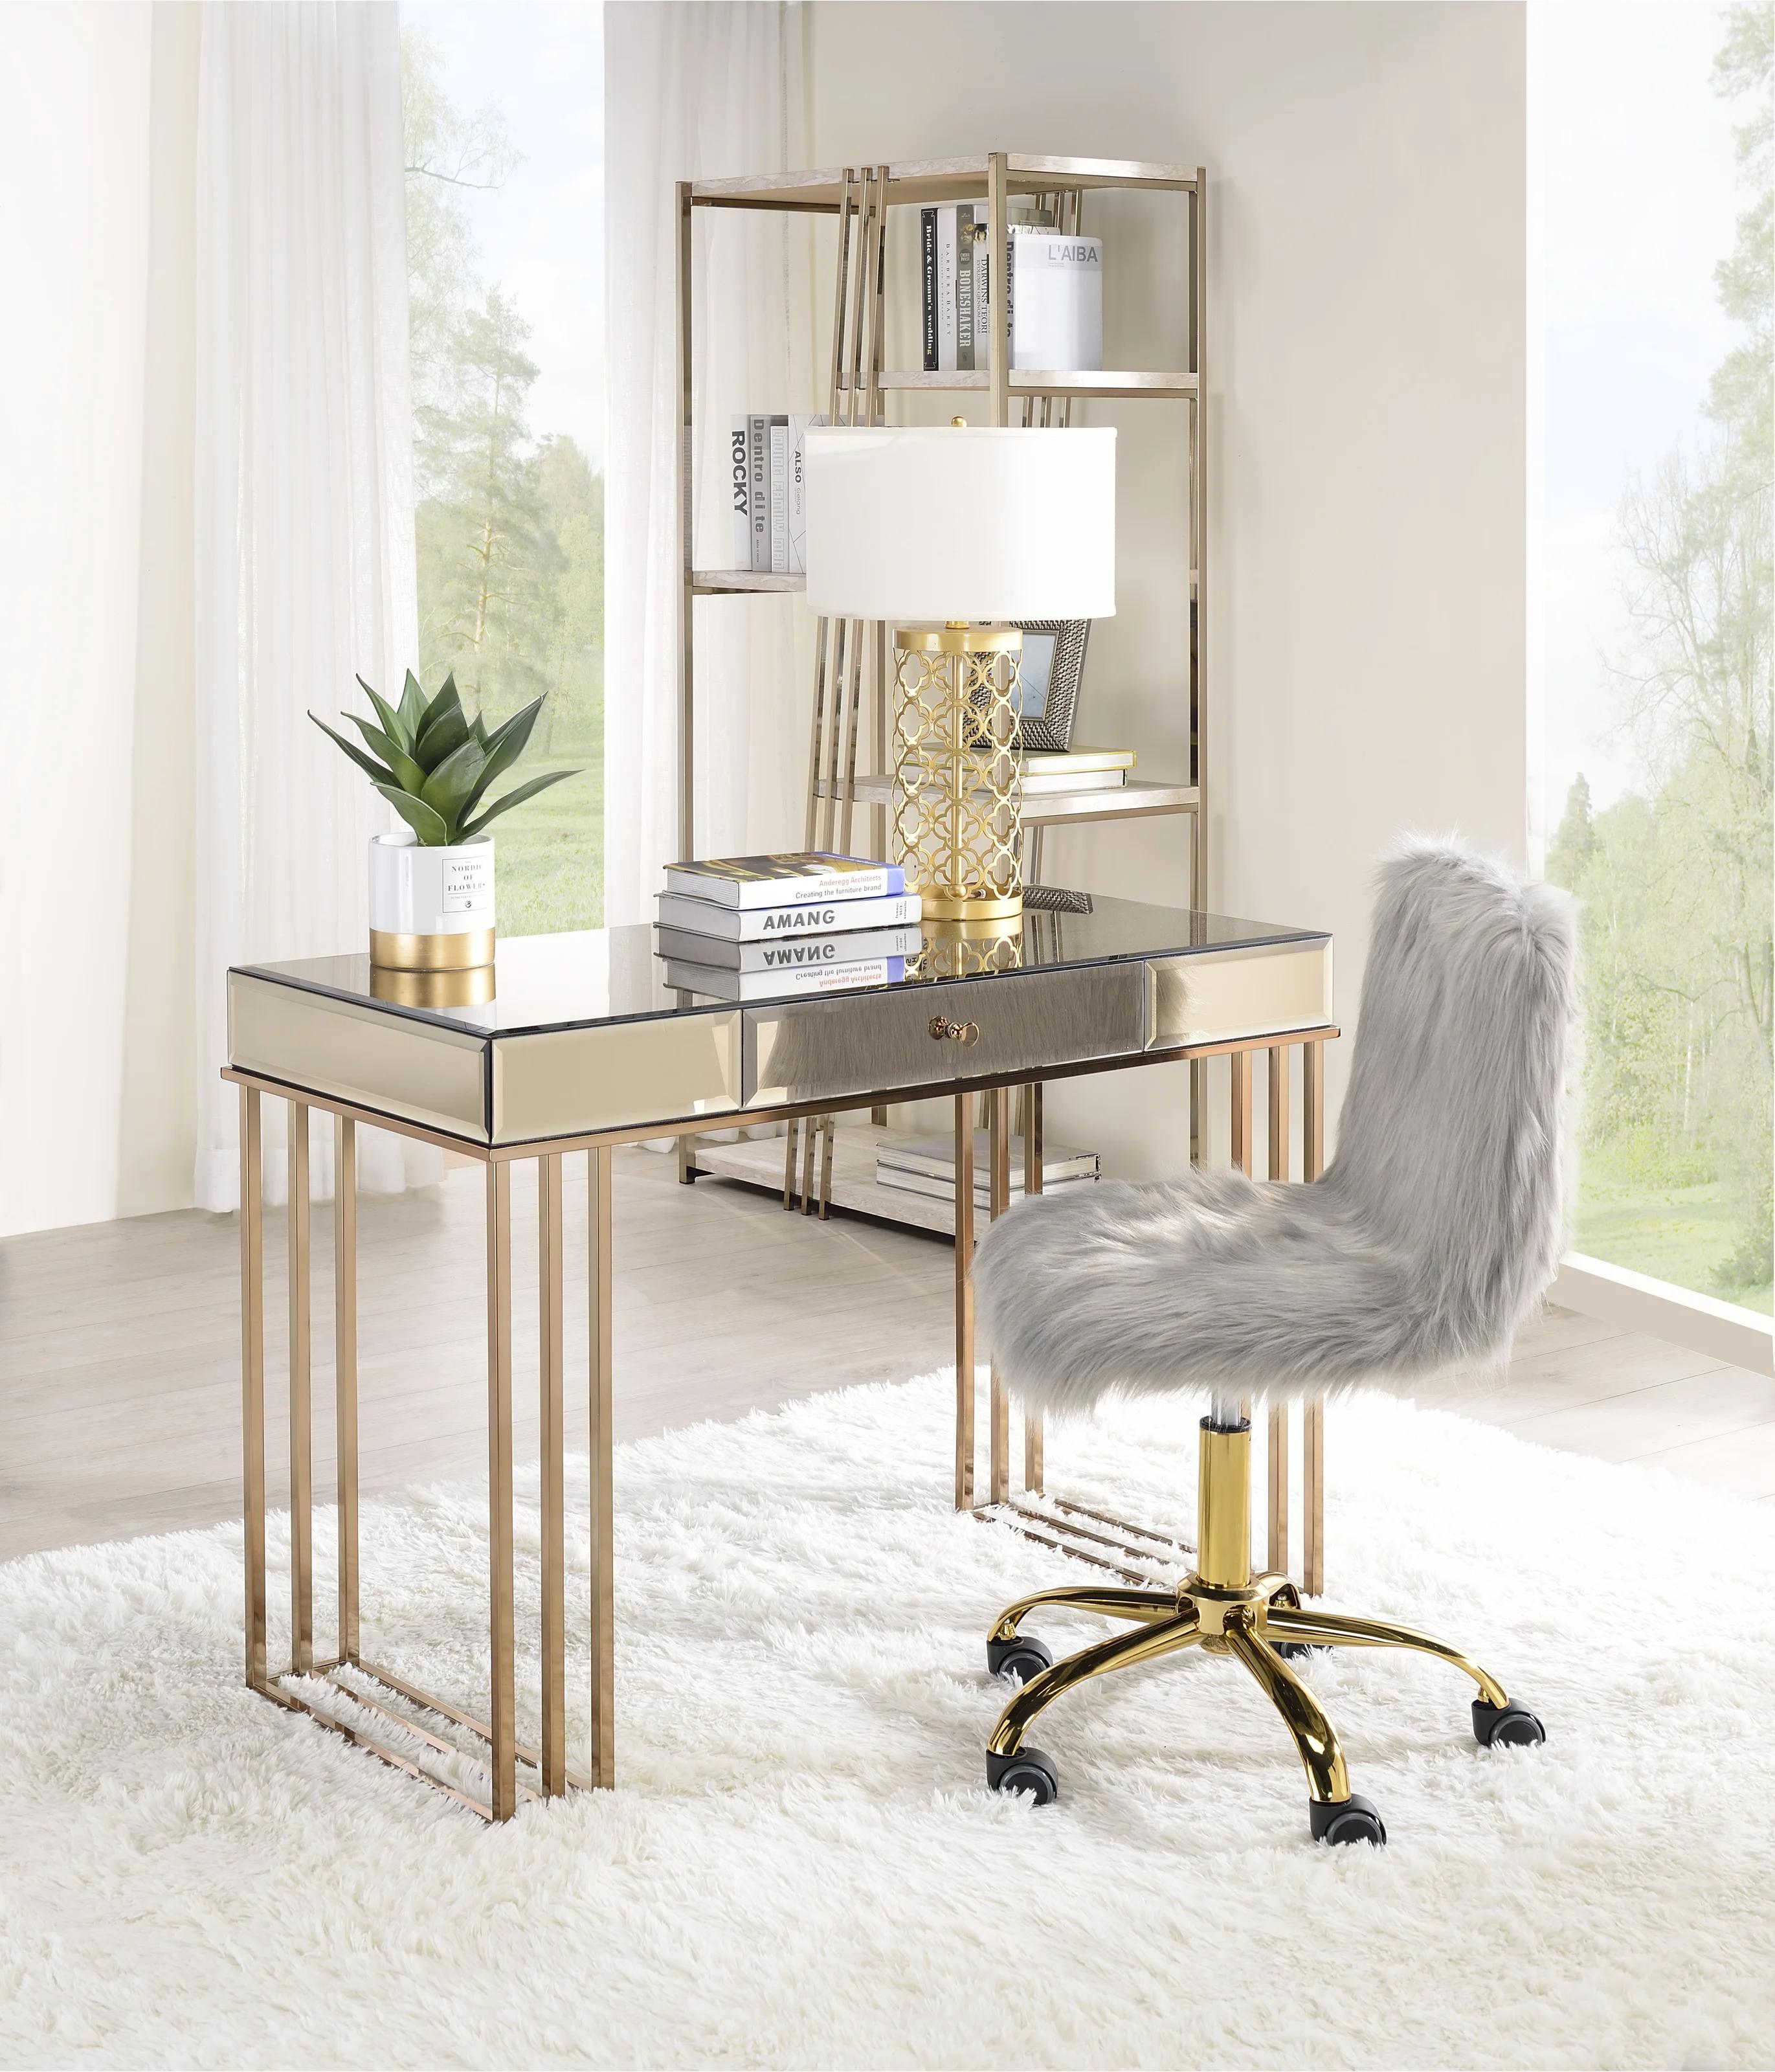 

    
Modern Smoky Mirrored & Champagne Writing Desk + Chair by Acme Critter 92981-2pcs
